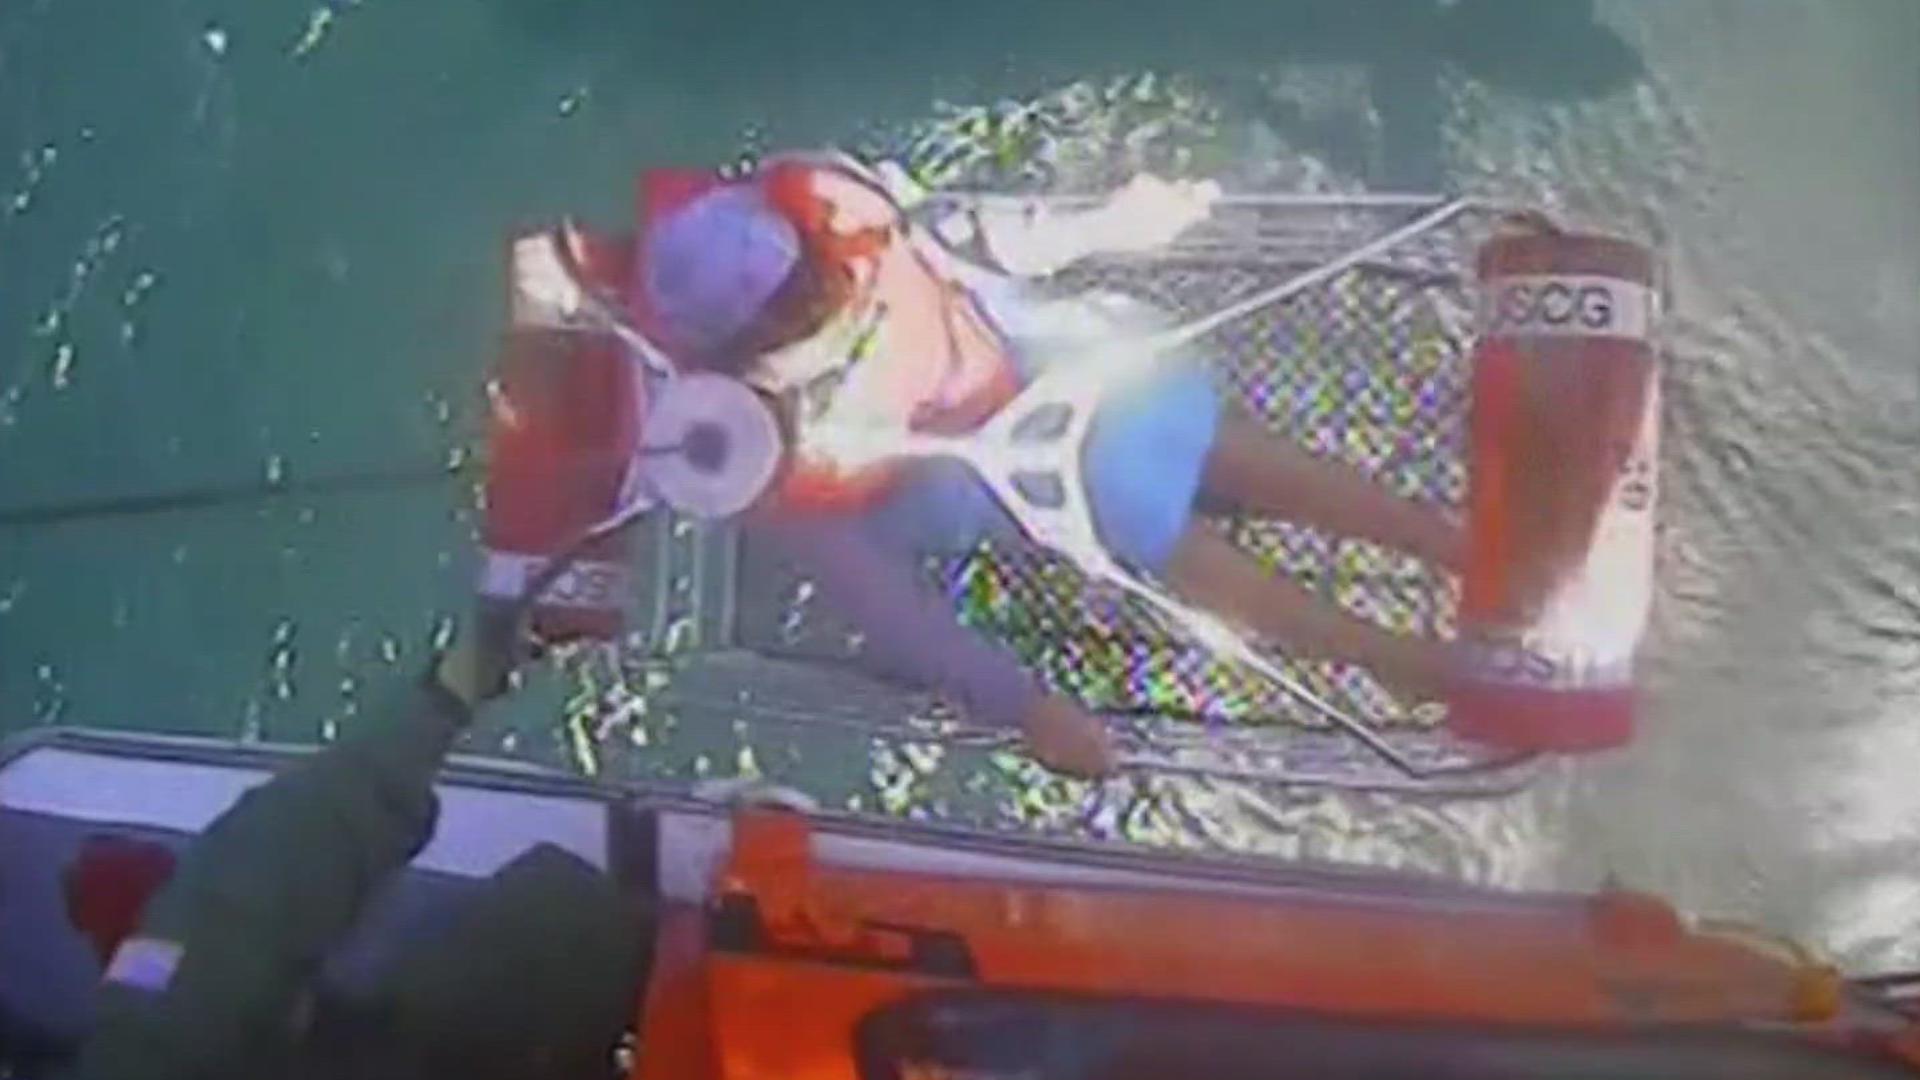 Two other victims were rescued and were described as 'responsive' by the Coast Guard.